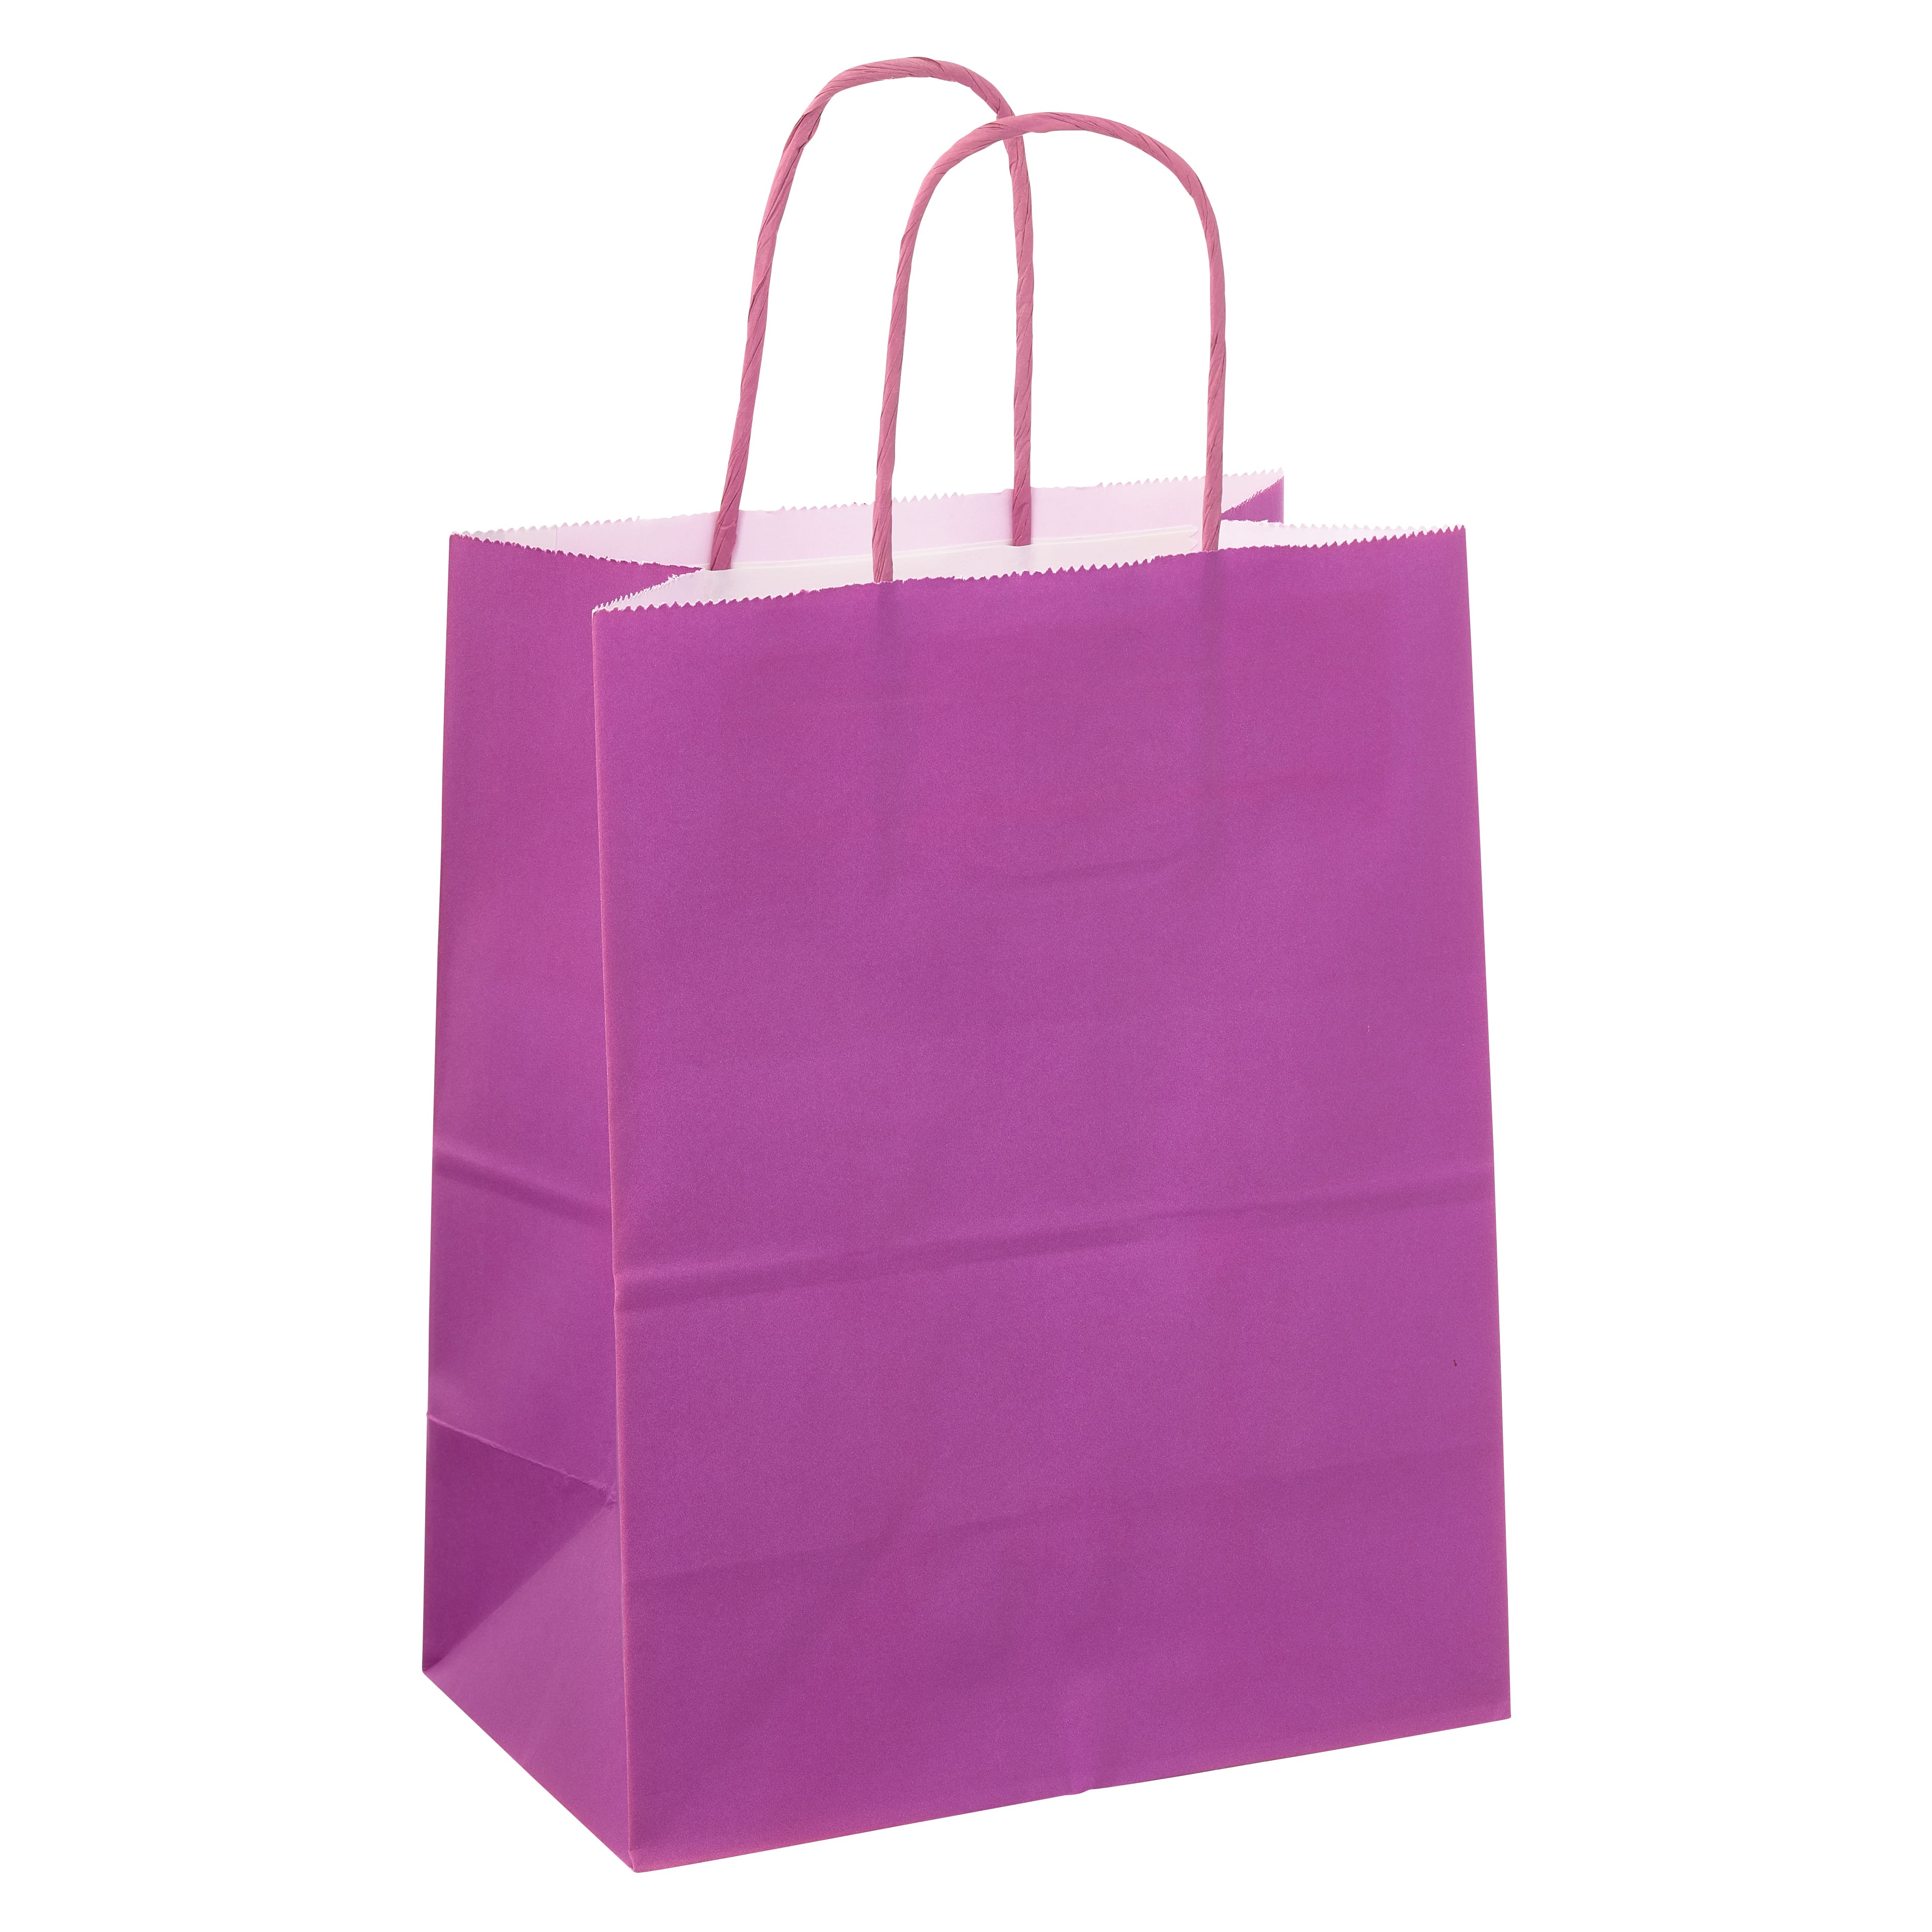 12 Packs: 13 ct. (156 total) Medium Bright Gifting Bags by Celebrate It&#x2122;